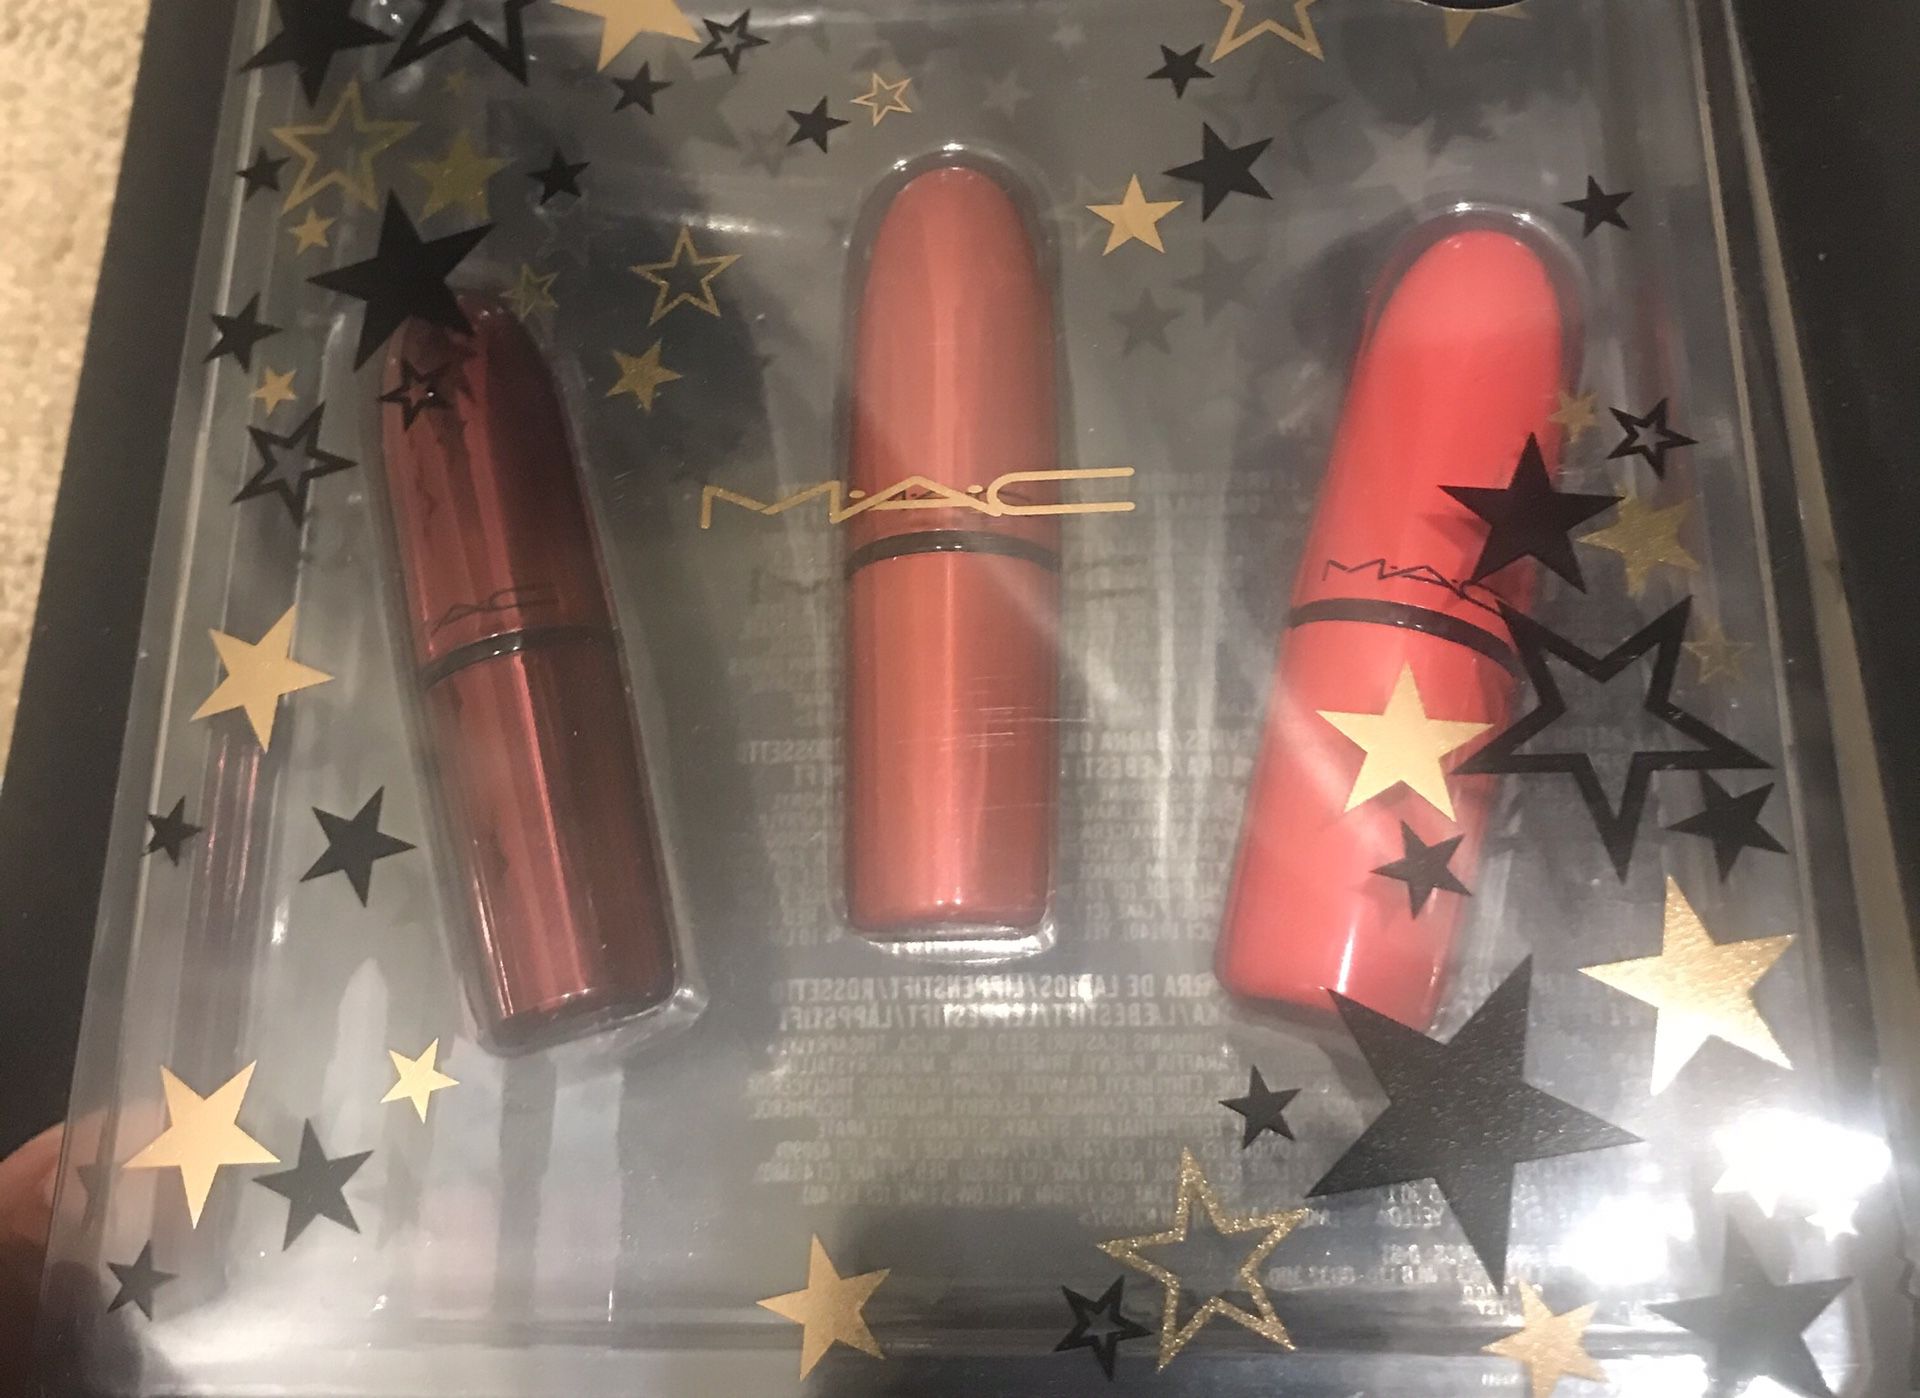 Three brand new Mac lipstick, beautiful colors for a great package deal.